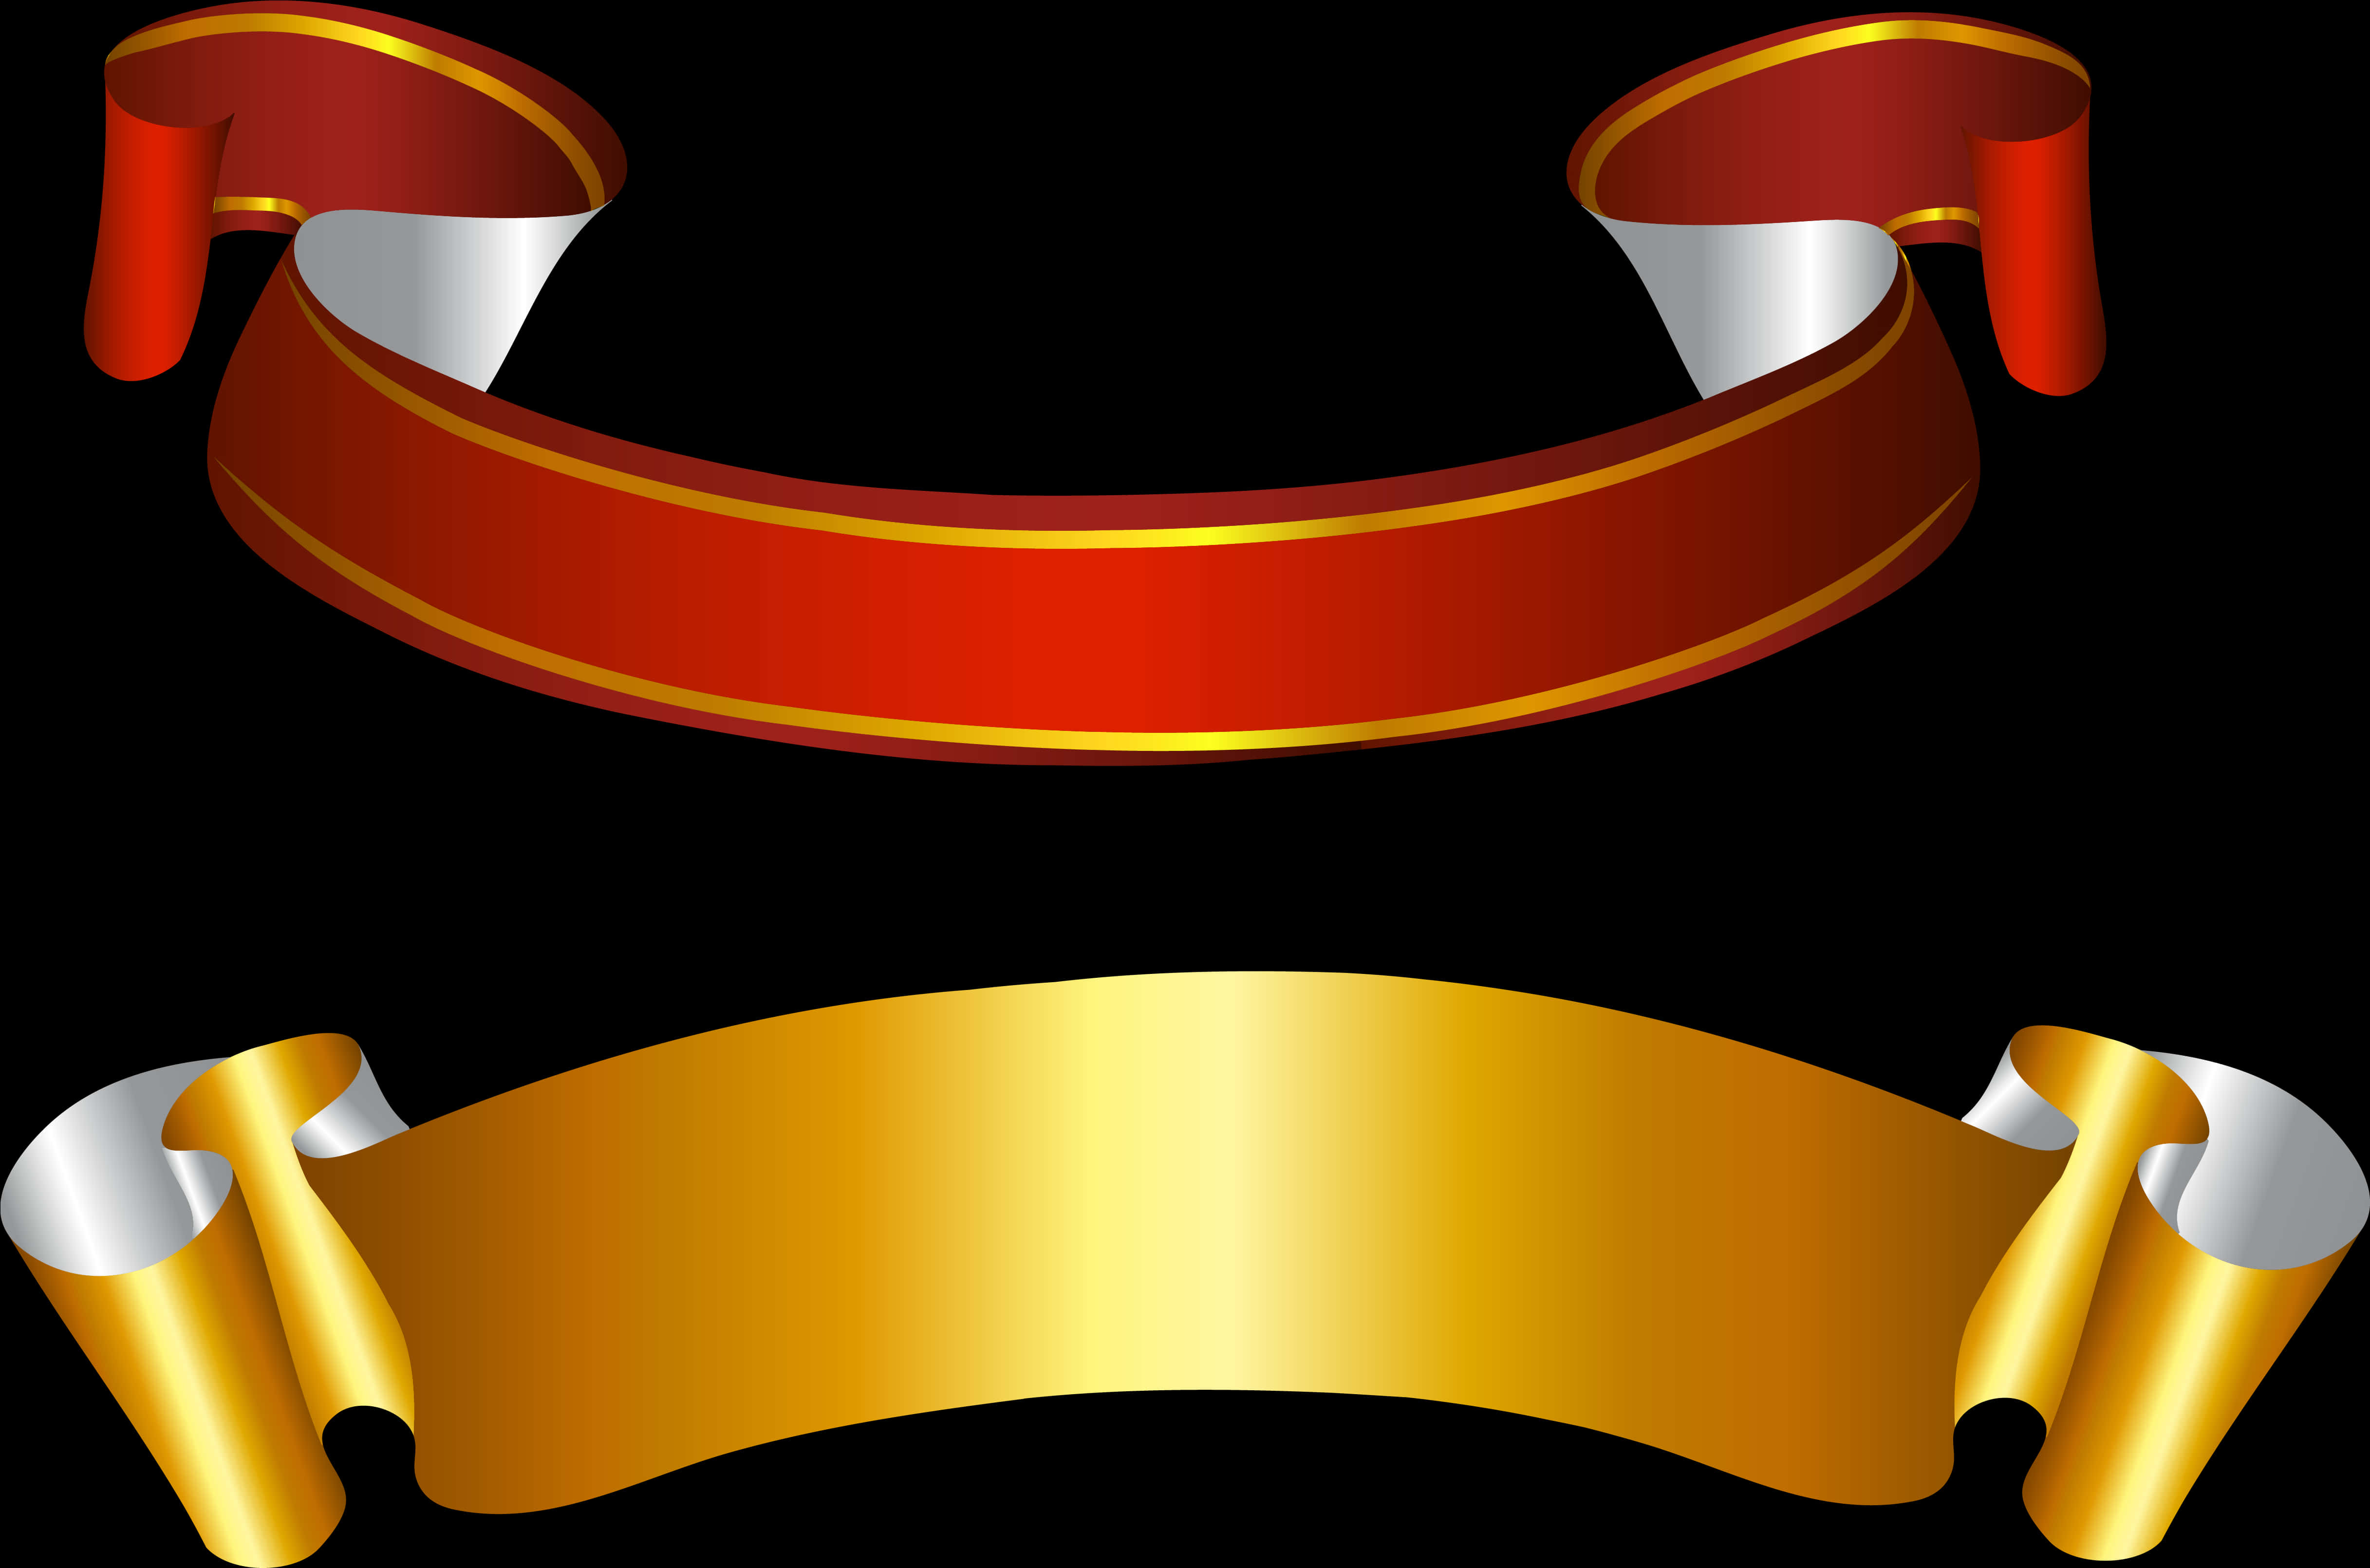 Redand Gold Banner Ribbons PNG